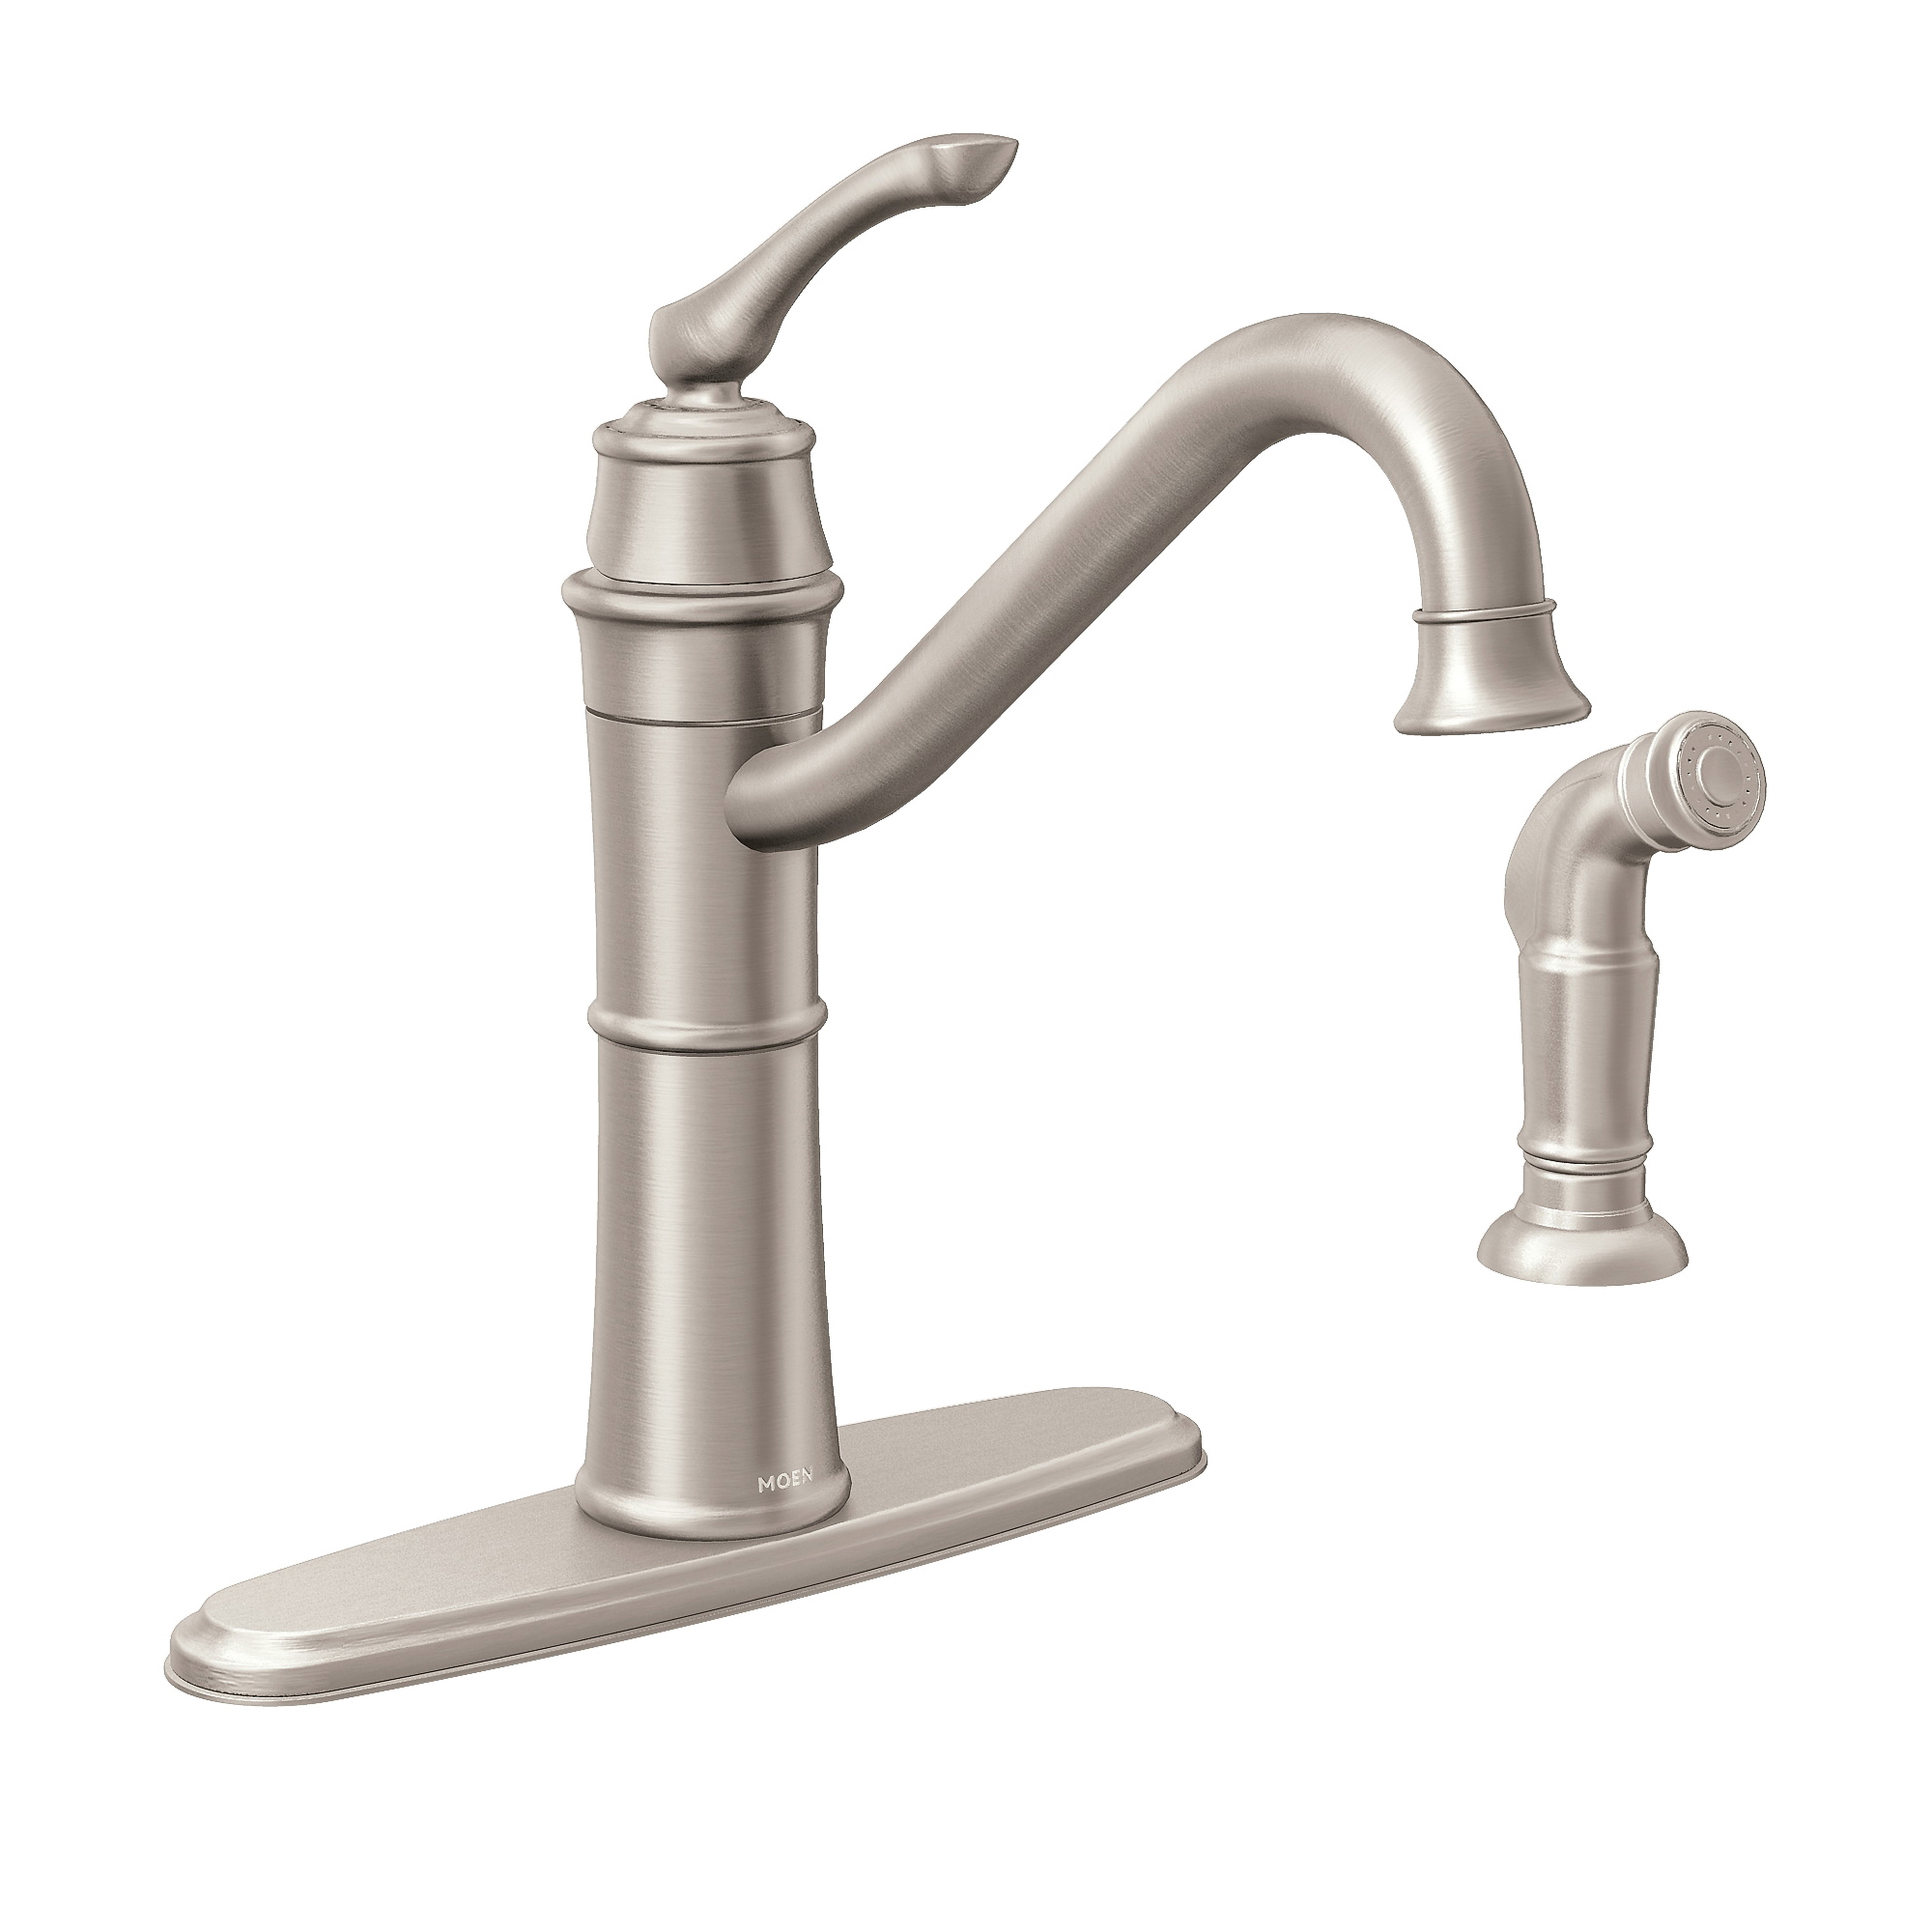 Wetherly Series 87999SRS Kitchen Faucet, 1.5 gpm, 1-Faucet Handle, Stainless Steel, Stainless Steel, Deck Mounting